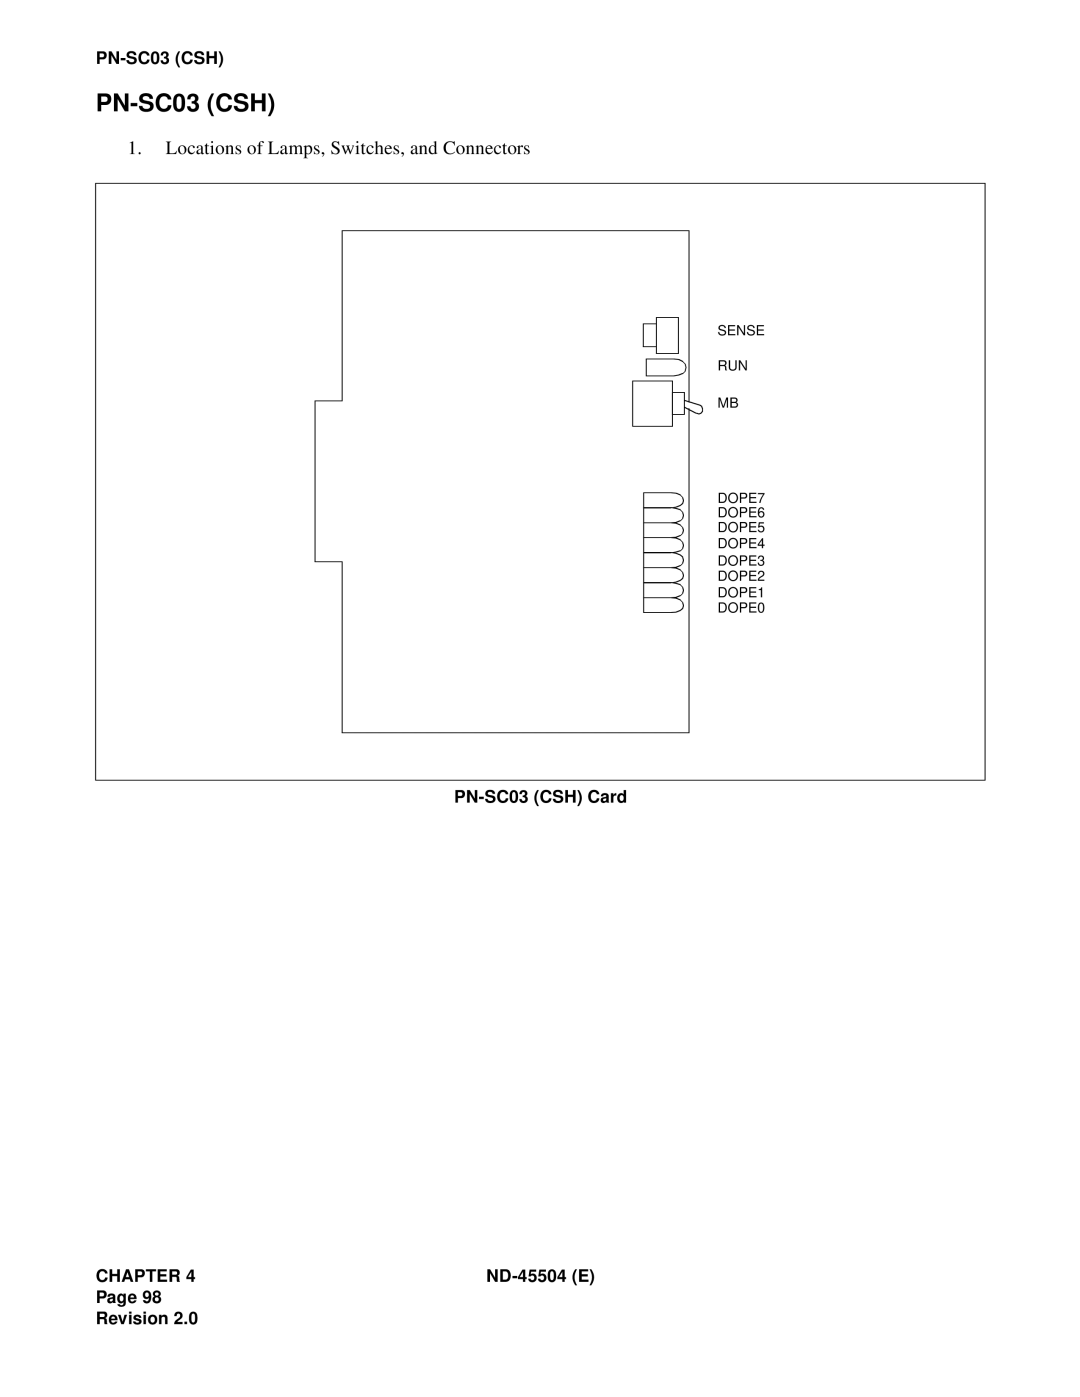 NEC 2000 IVS manual Locations of Lamps, Switches, and Connectors, PN-SC03CSH Card, Chapter, ND-45504E, Page Revision 